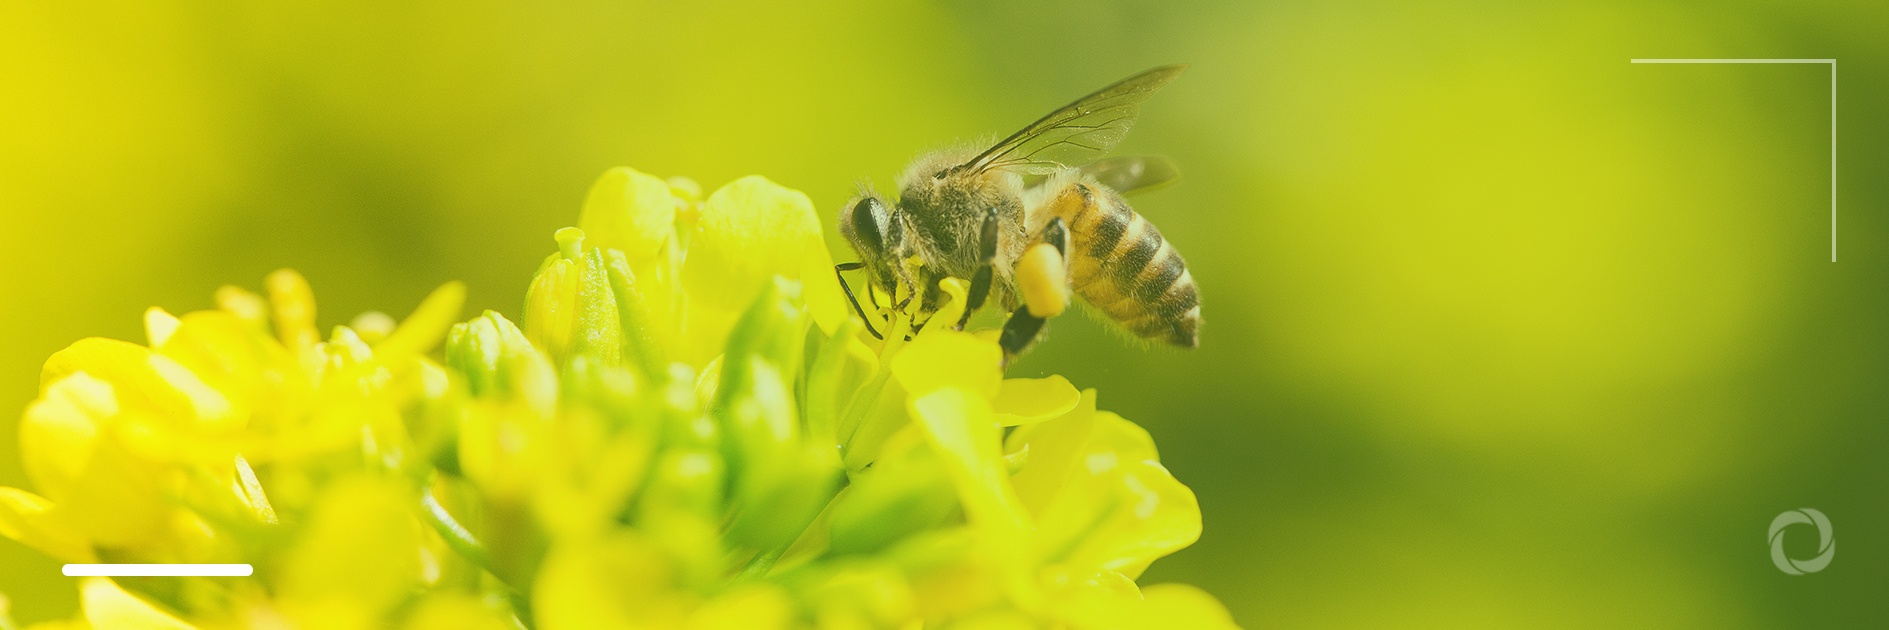 World Bee Day: how to ‘bee engaged’ and support pollinators